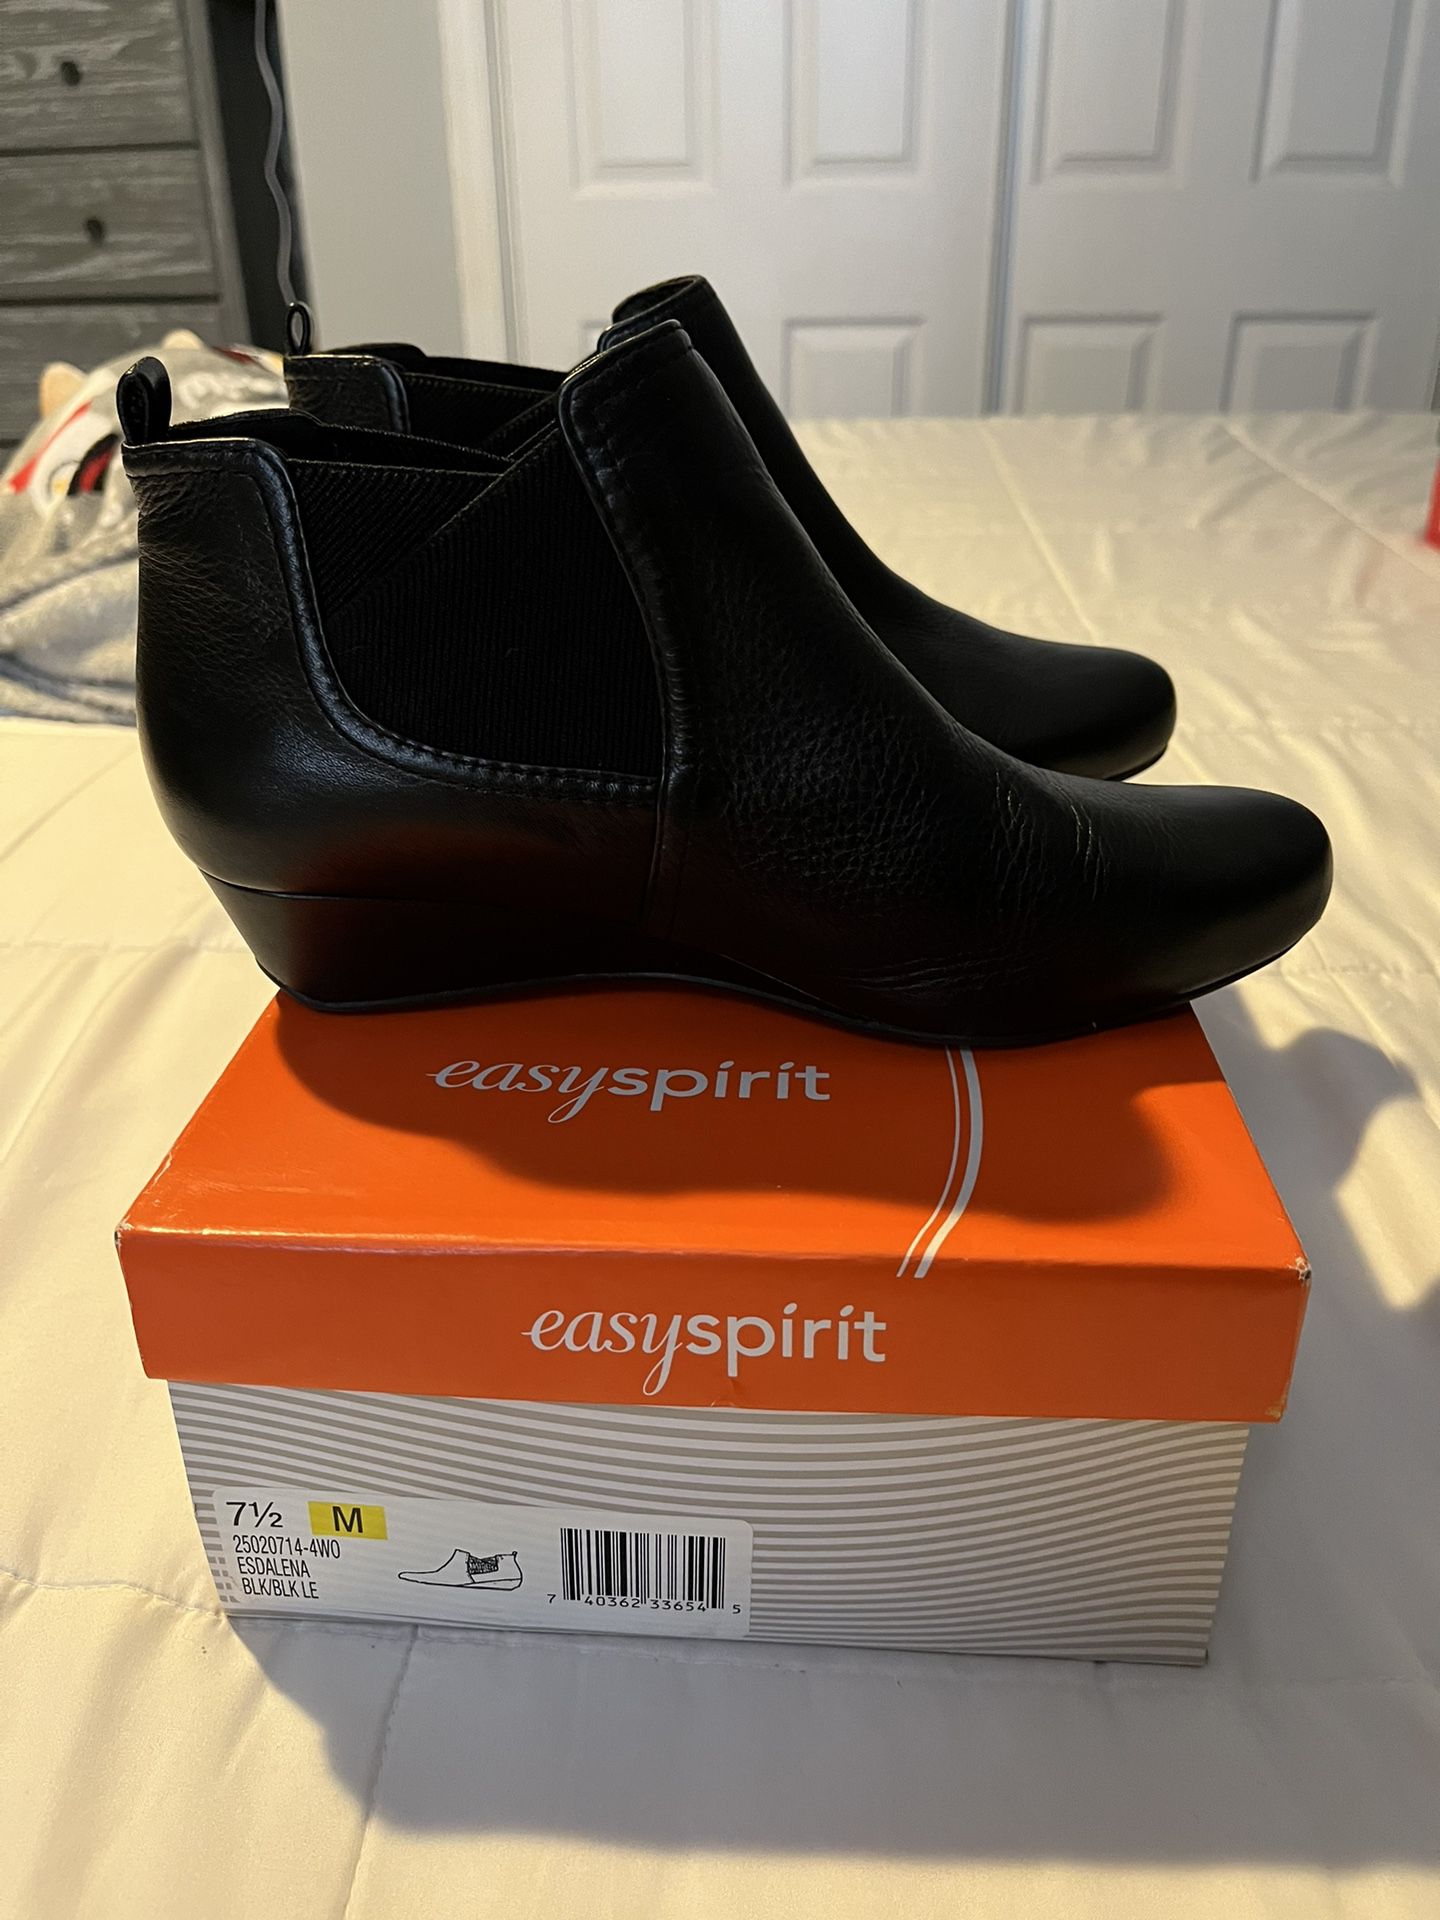 Easy Spirit Black Leather Boots